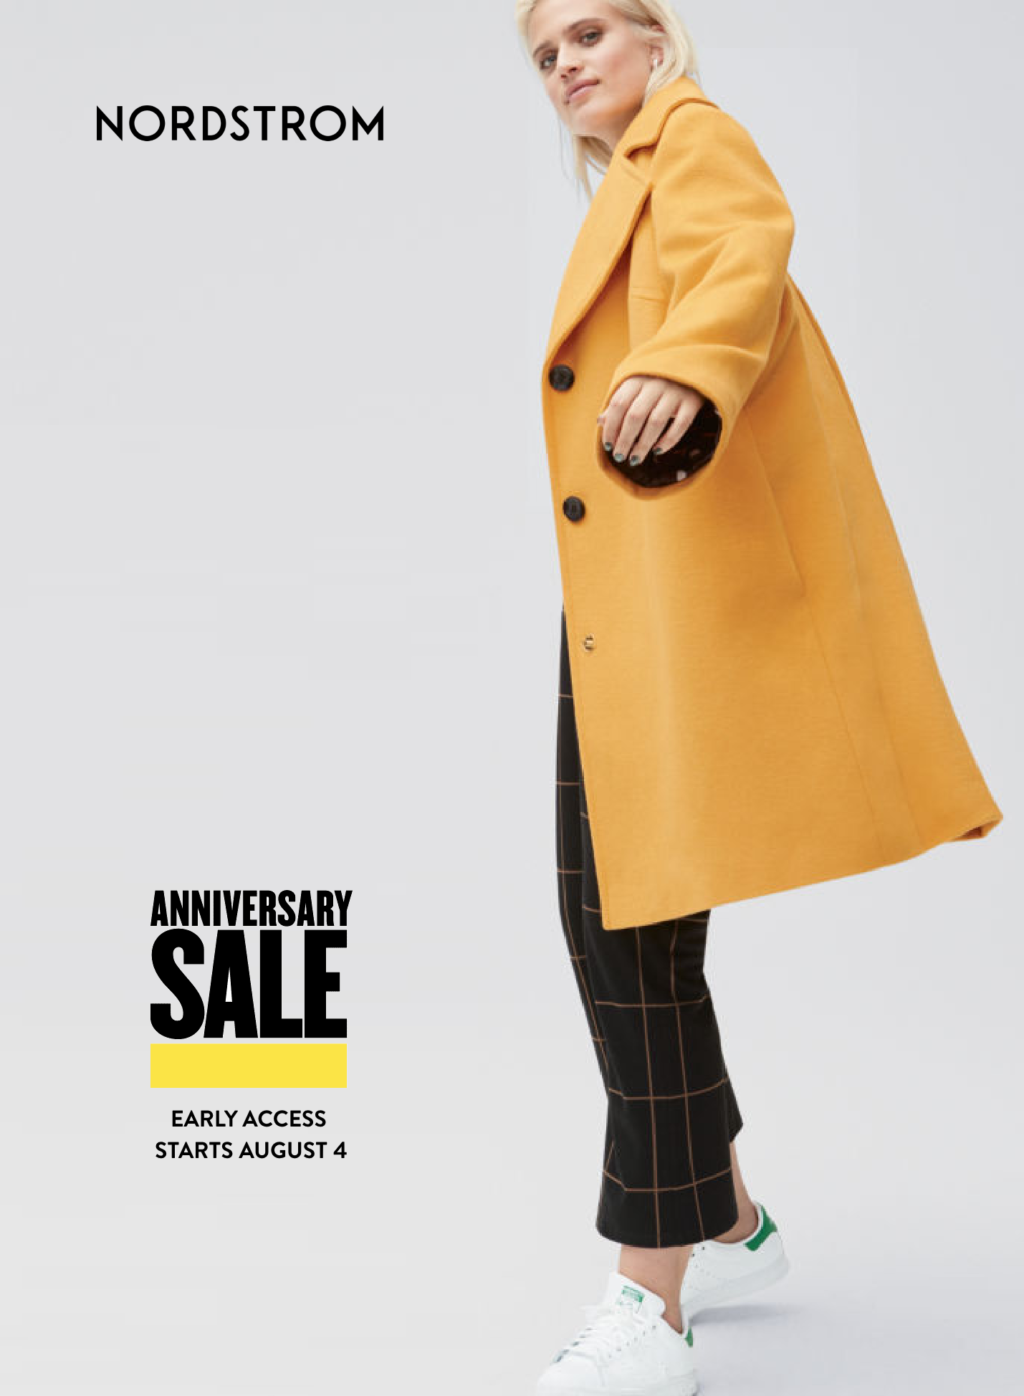 Nordstrom Anniversary Sale 2020 Catalog: First Look